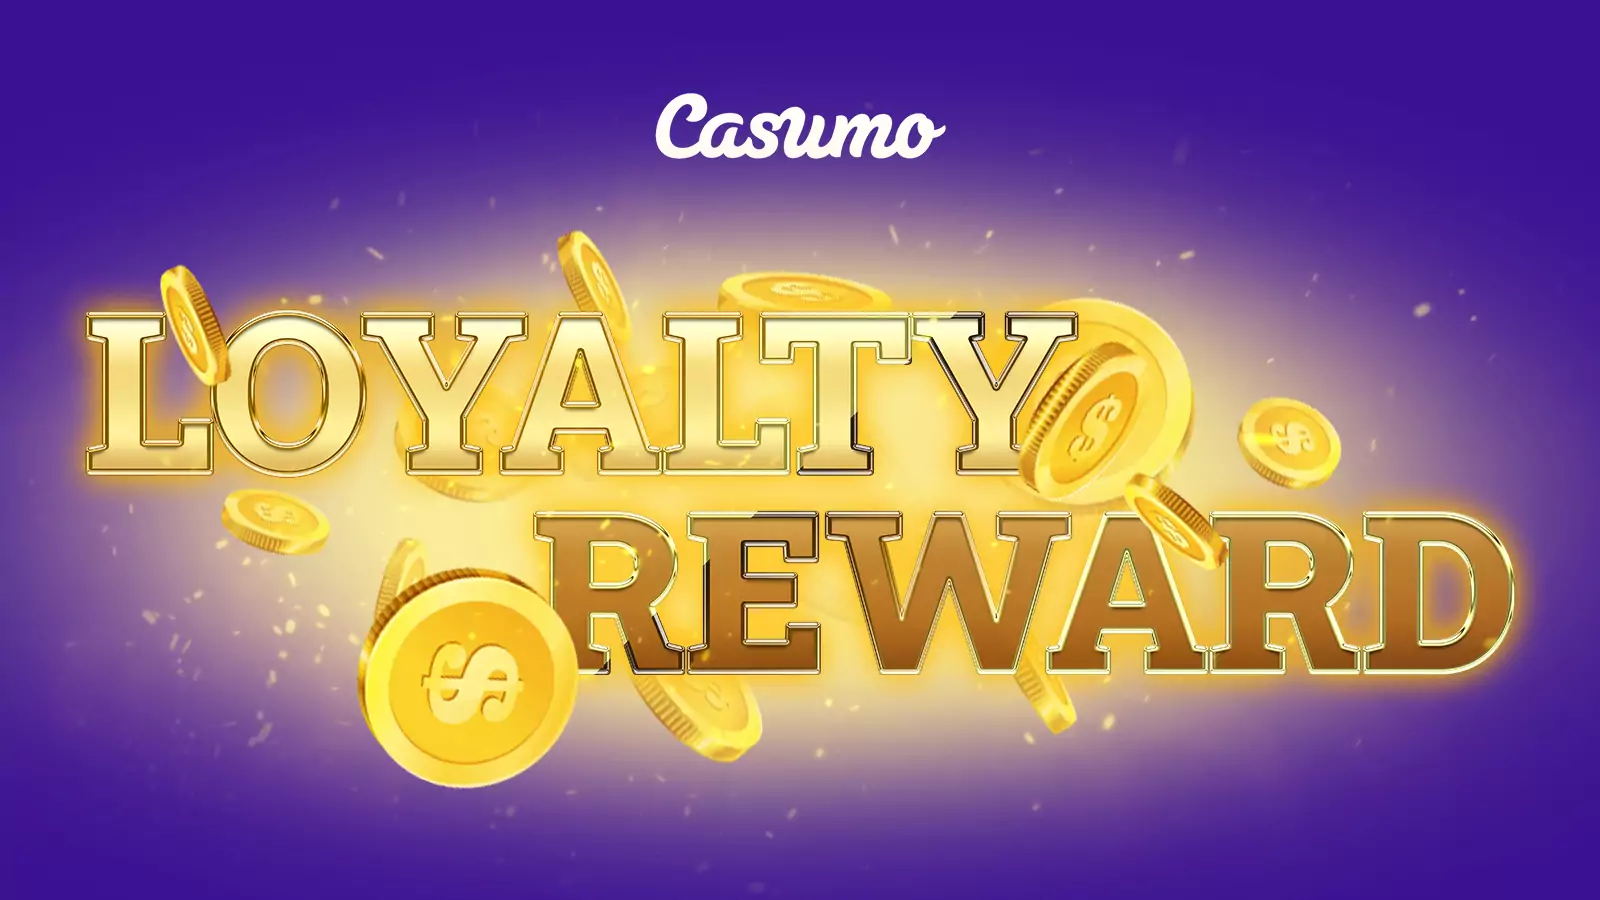 Register at the Casumo casino and join the loyalty program.